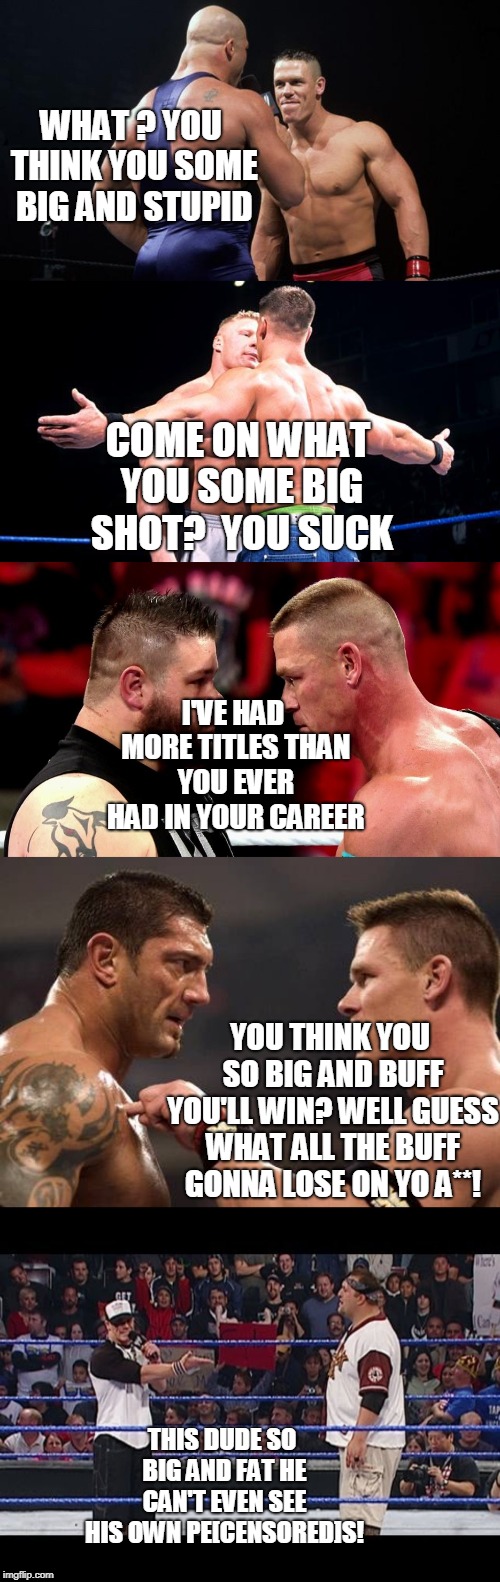 John Cena Savage Memes | WHAT ? YOU THINK YOU SOME BIG AND STUPID; COME ON WHAT YOU SOME BIG SHOT?  YOU SUCK; I'VE HAD MORE TITLES THAN YOU EVER HAD IN YOUR CAREER; YOU THINK YOU SO BIG AND BUFF YOU'LL WIN? WELL GUESS WHAT ALL THE BUFF GONNA LOSE ON YO A**! THIS DUDE SO BIG AND FAT HE CAN'T EVEN SEE HIS OWN PE[CENSORED]S! | image tagged in john cena | made w/ Imgflip meme maker